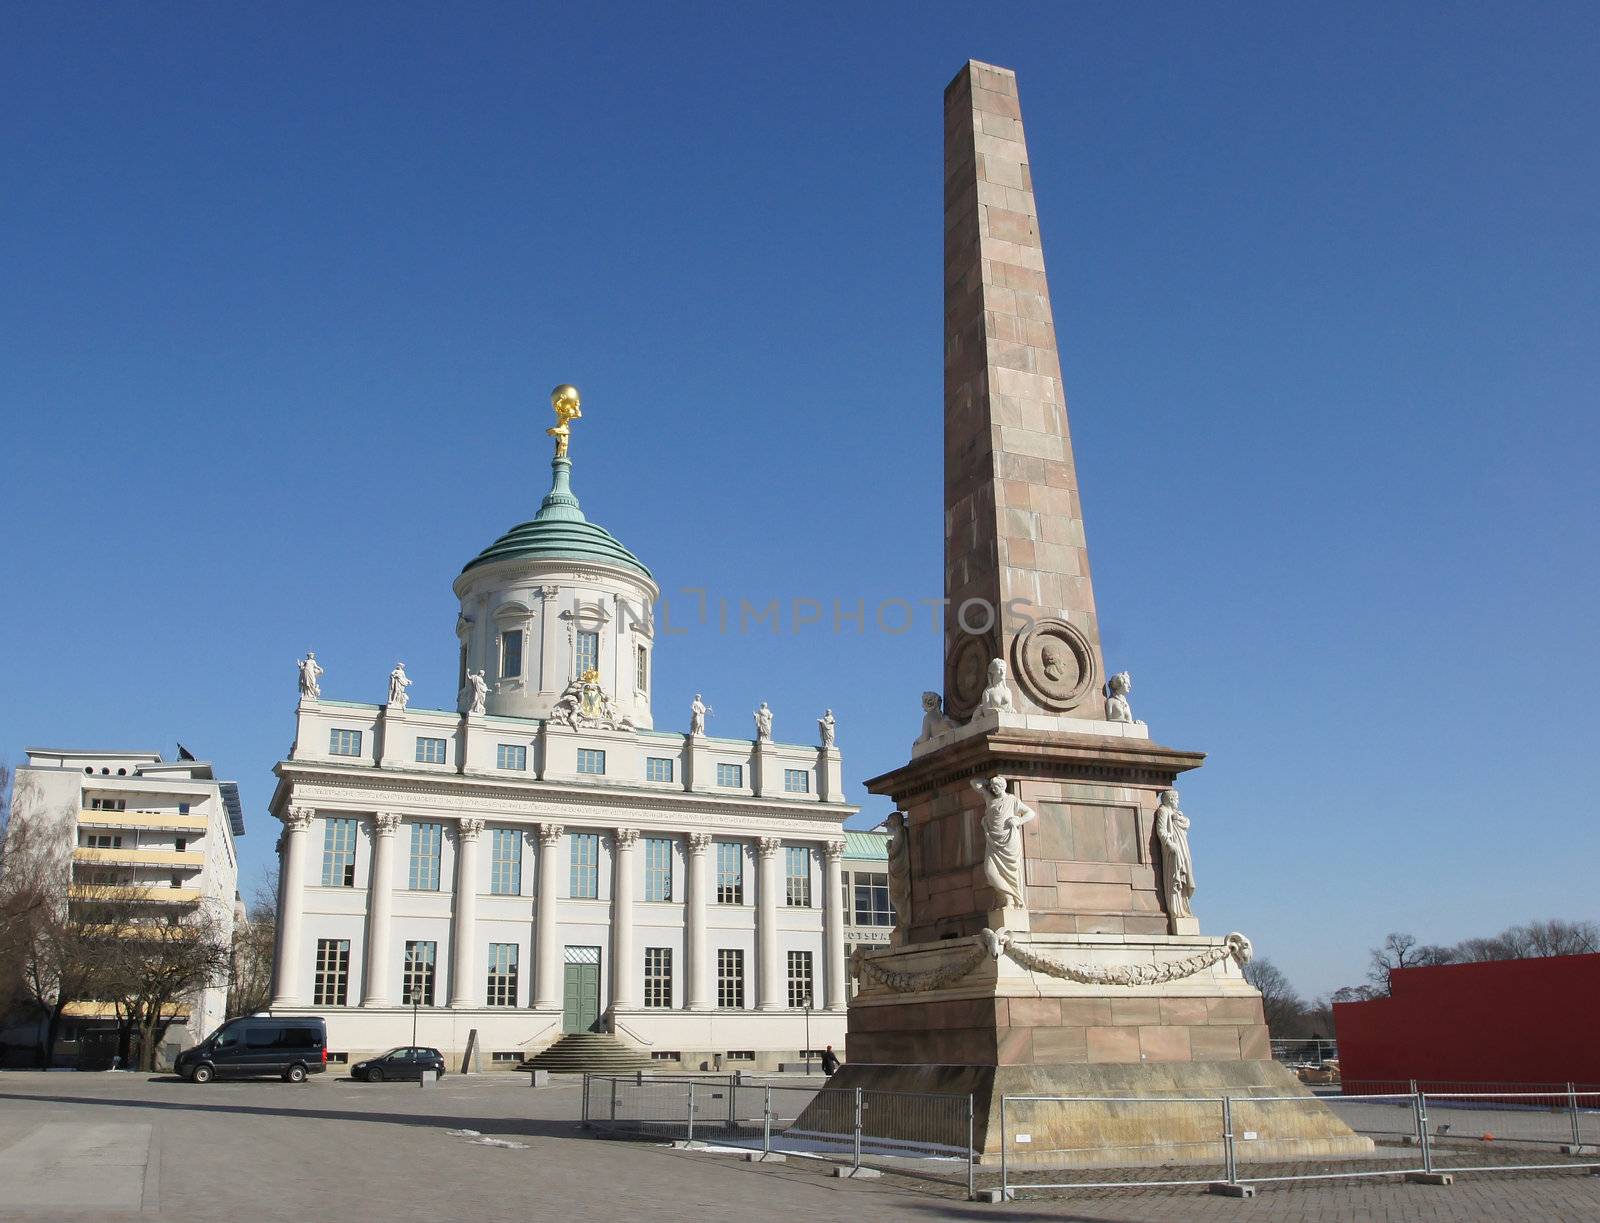 Obelisk and historic town hall, Potsdam, Germany, Europe